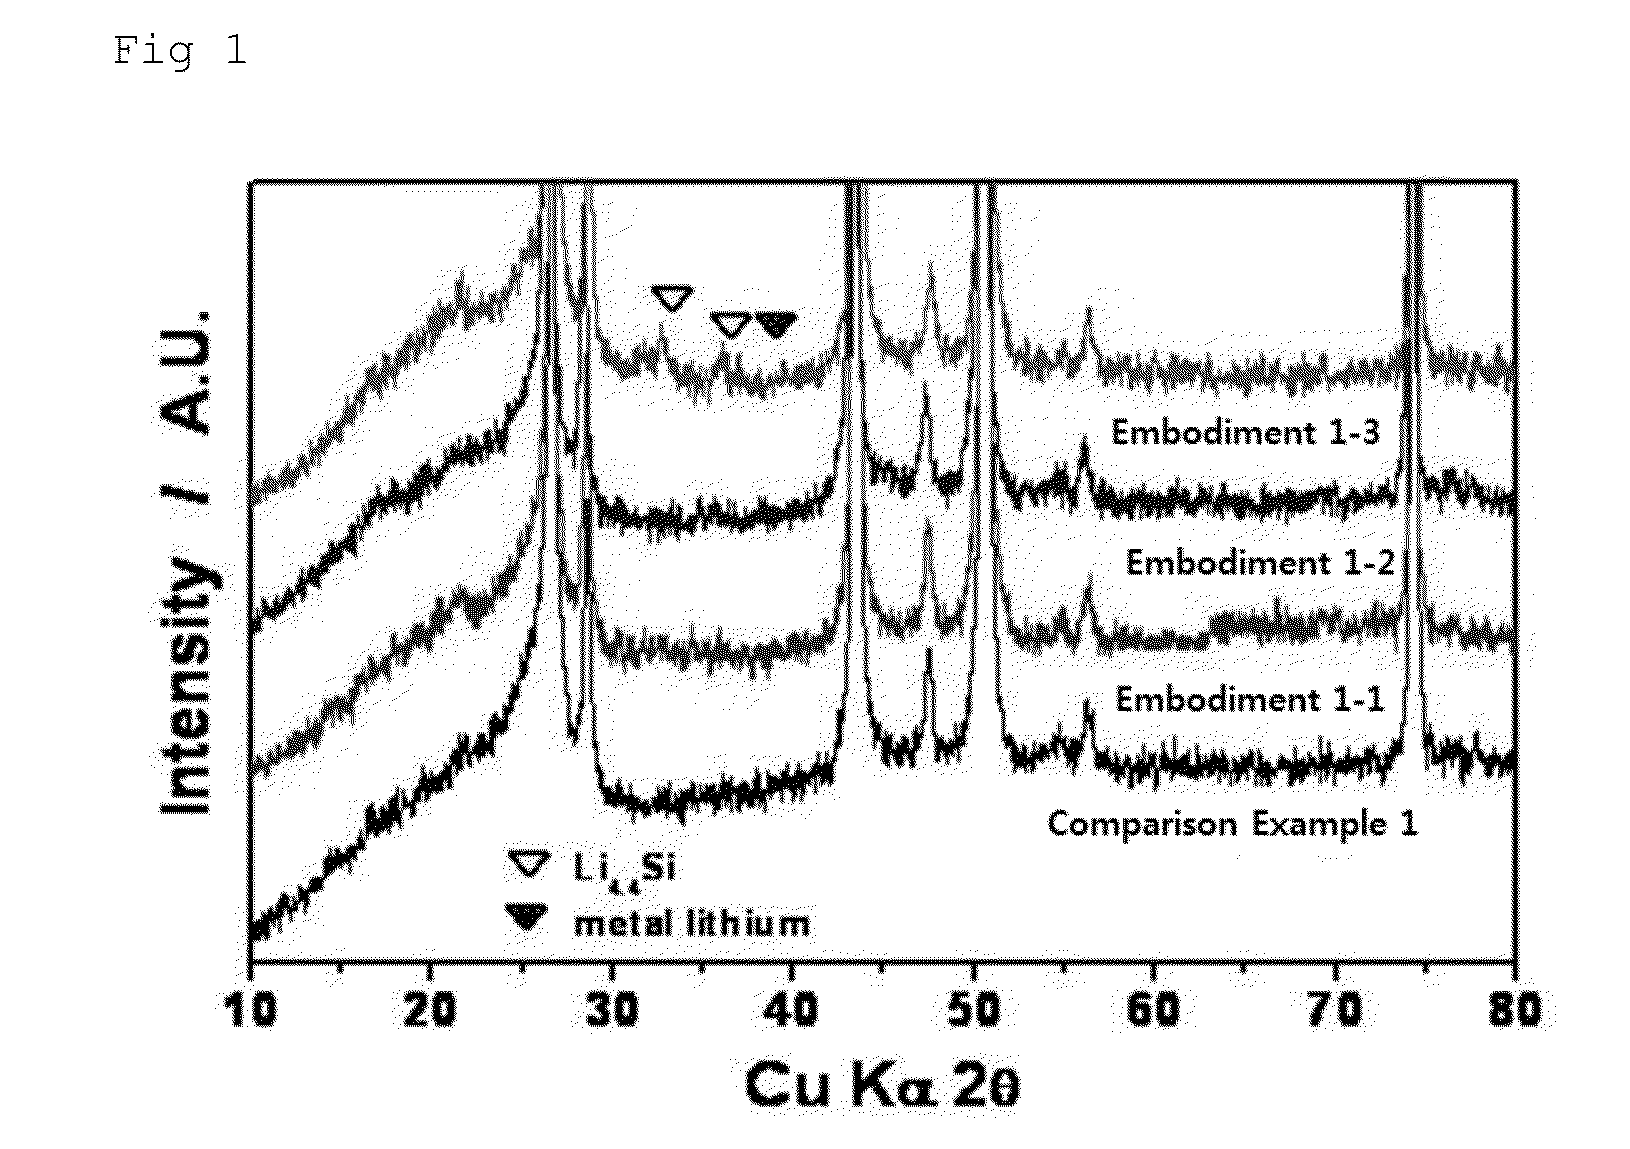 Method for manufacturing a lithiated metal-carbon composite electrode, lithiated metal-carbon composite electrode manufactured thereby, and electrochemical device including the electrode